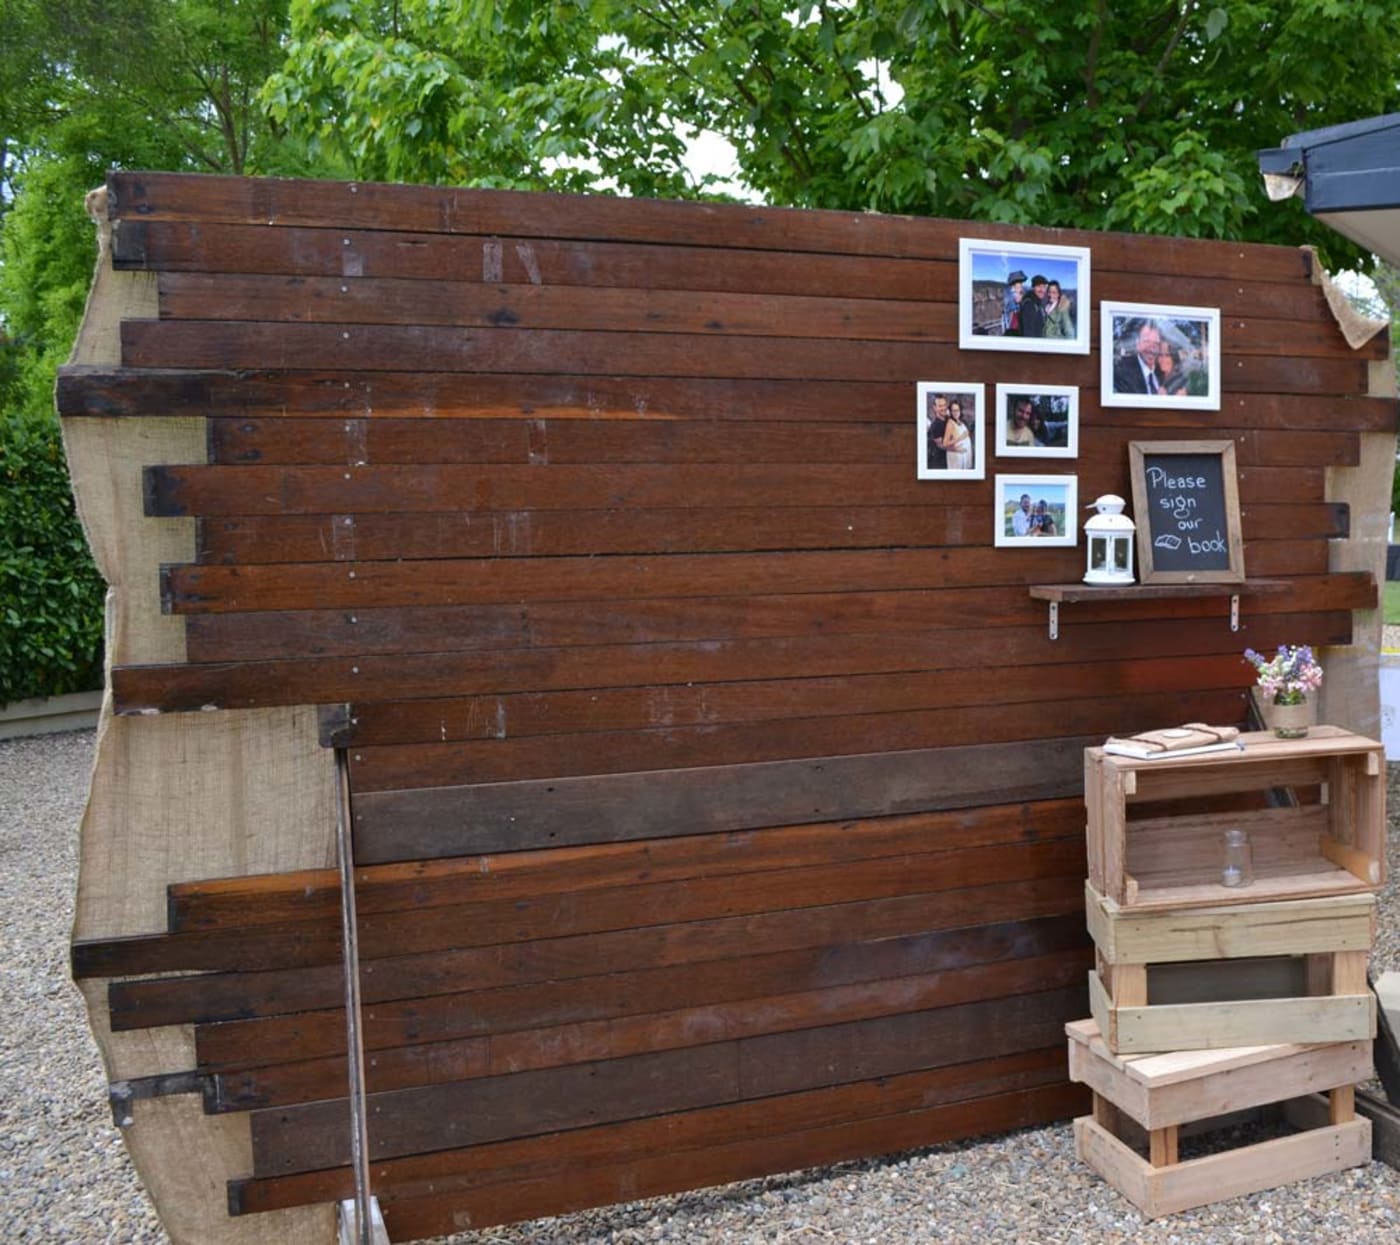 Recycled timber turned into feature wall for sustainable wedding